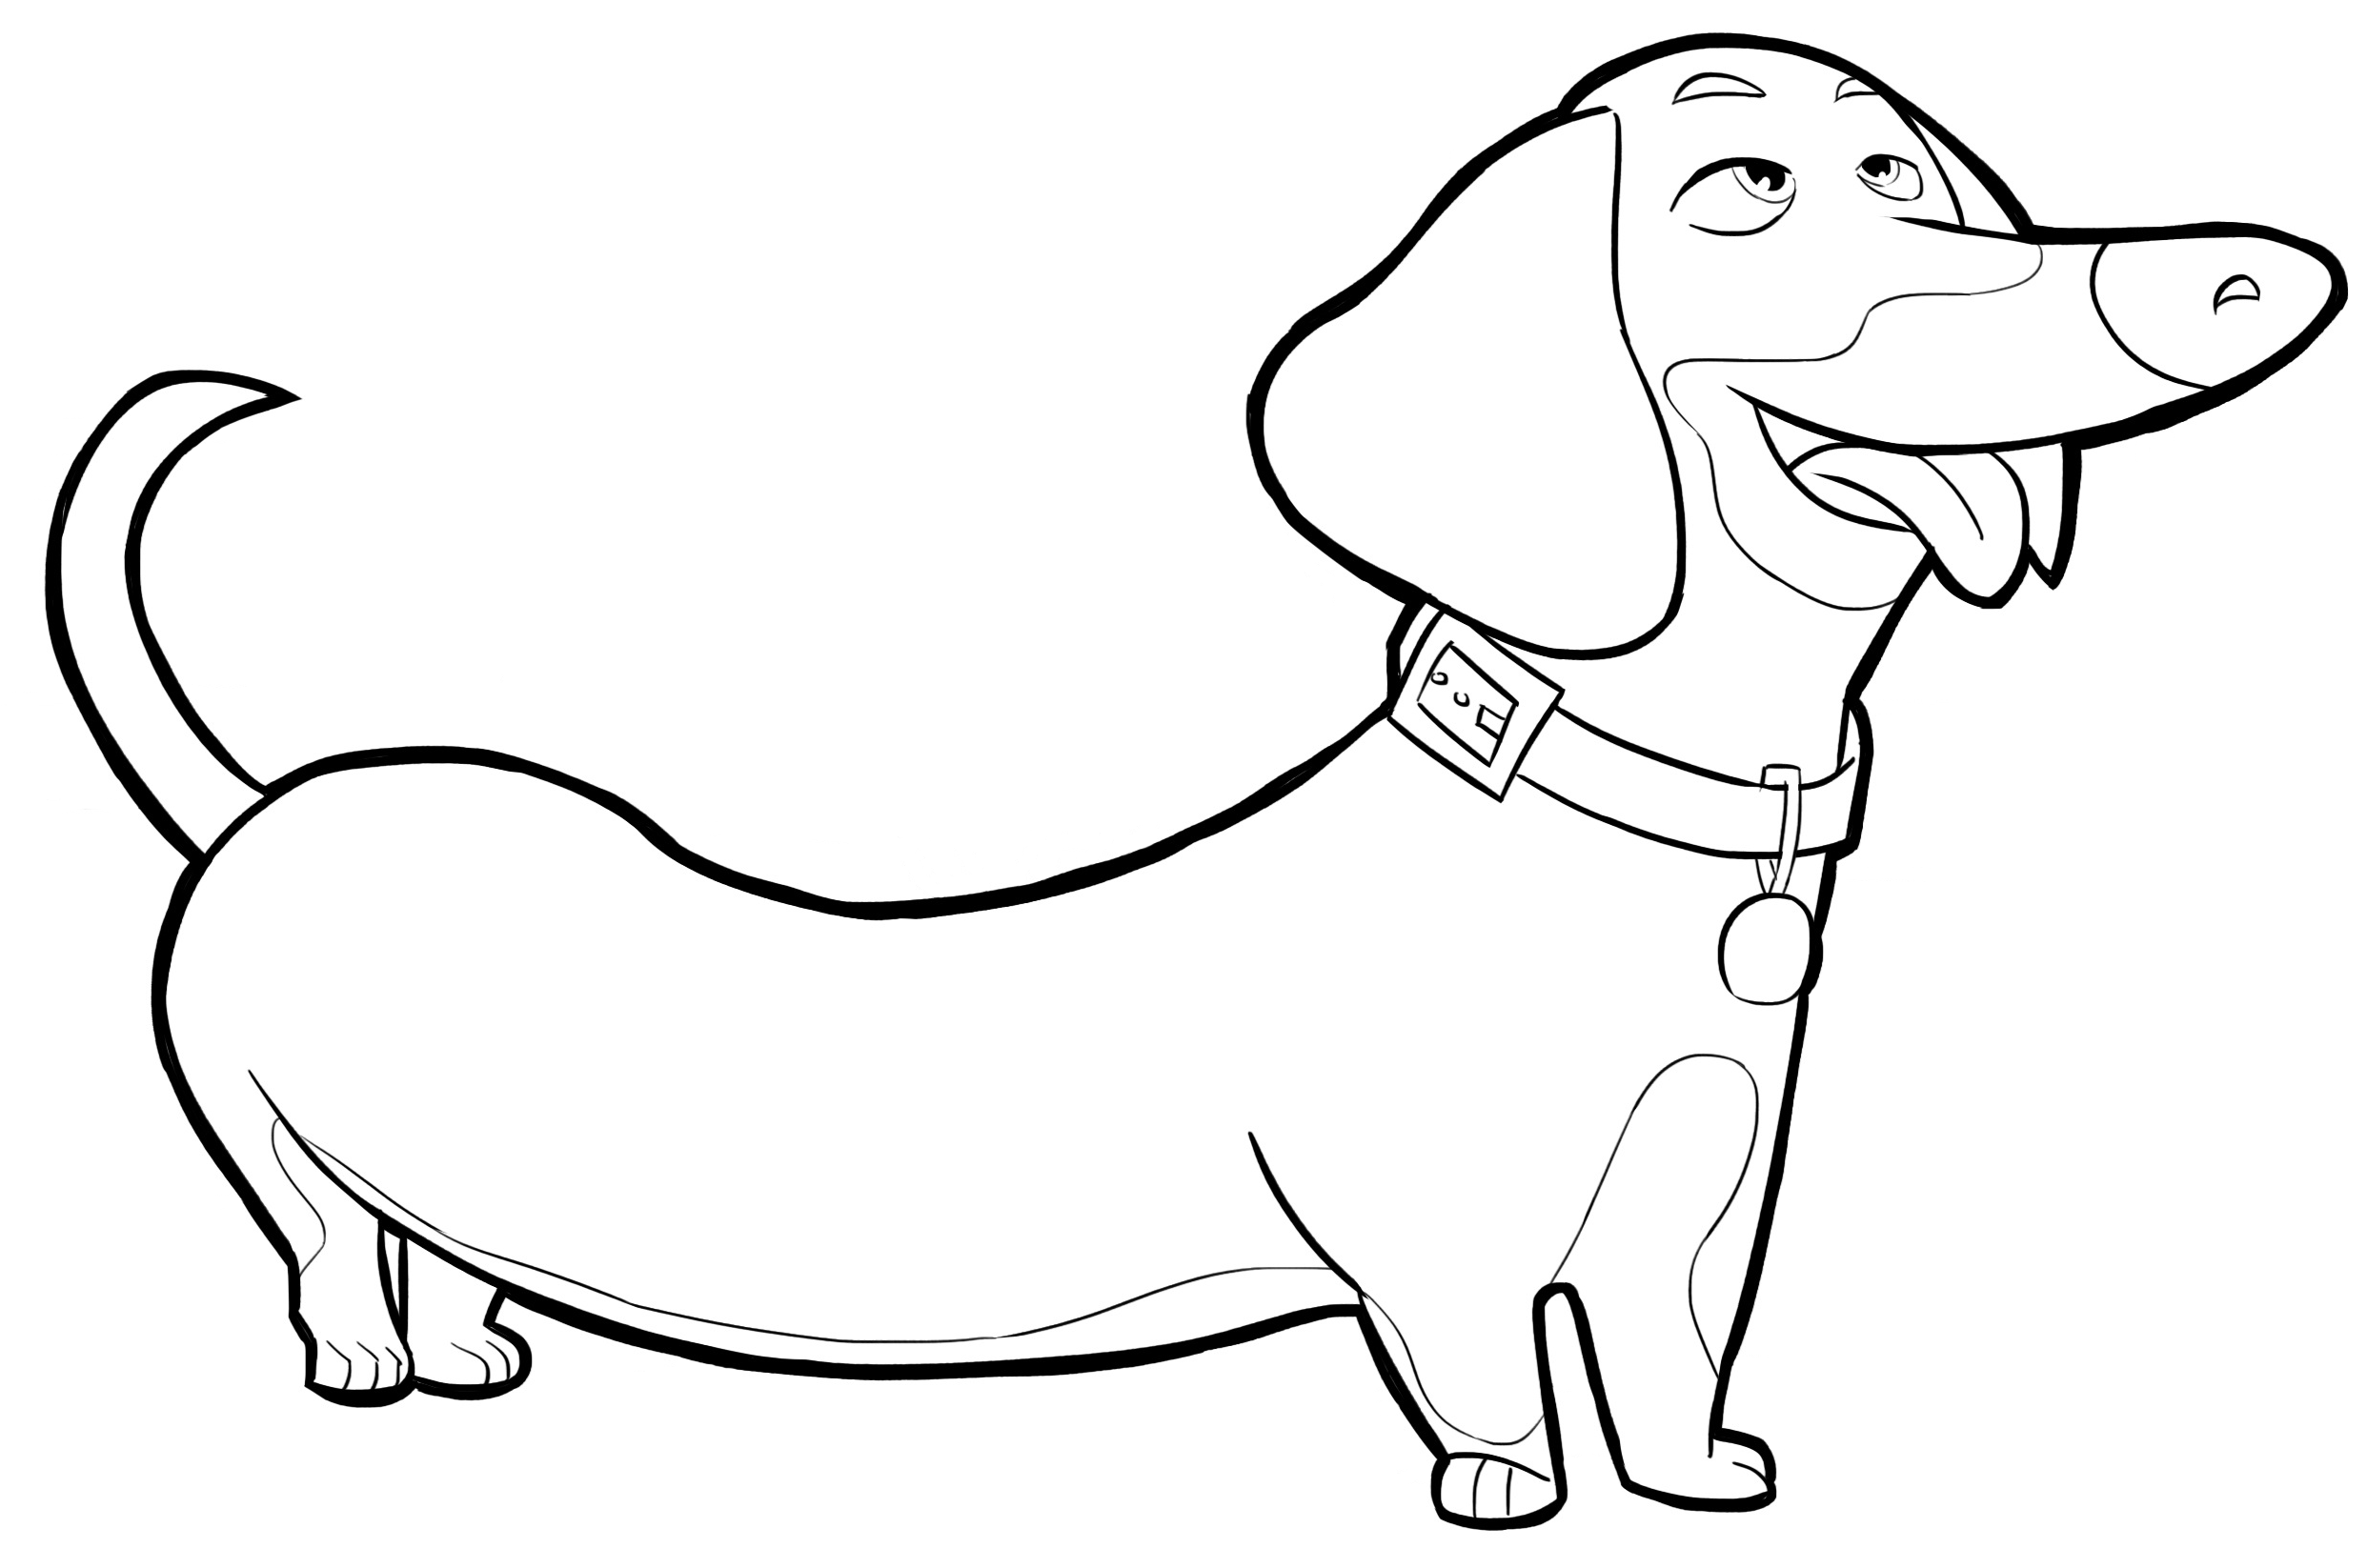 Dachshund coloring pages